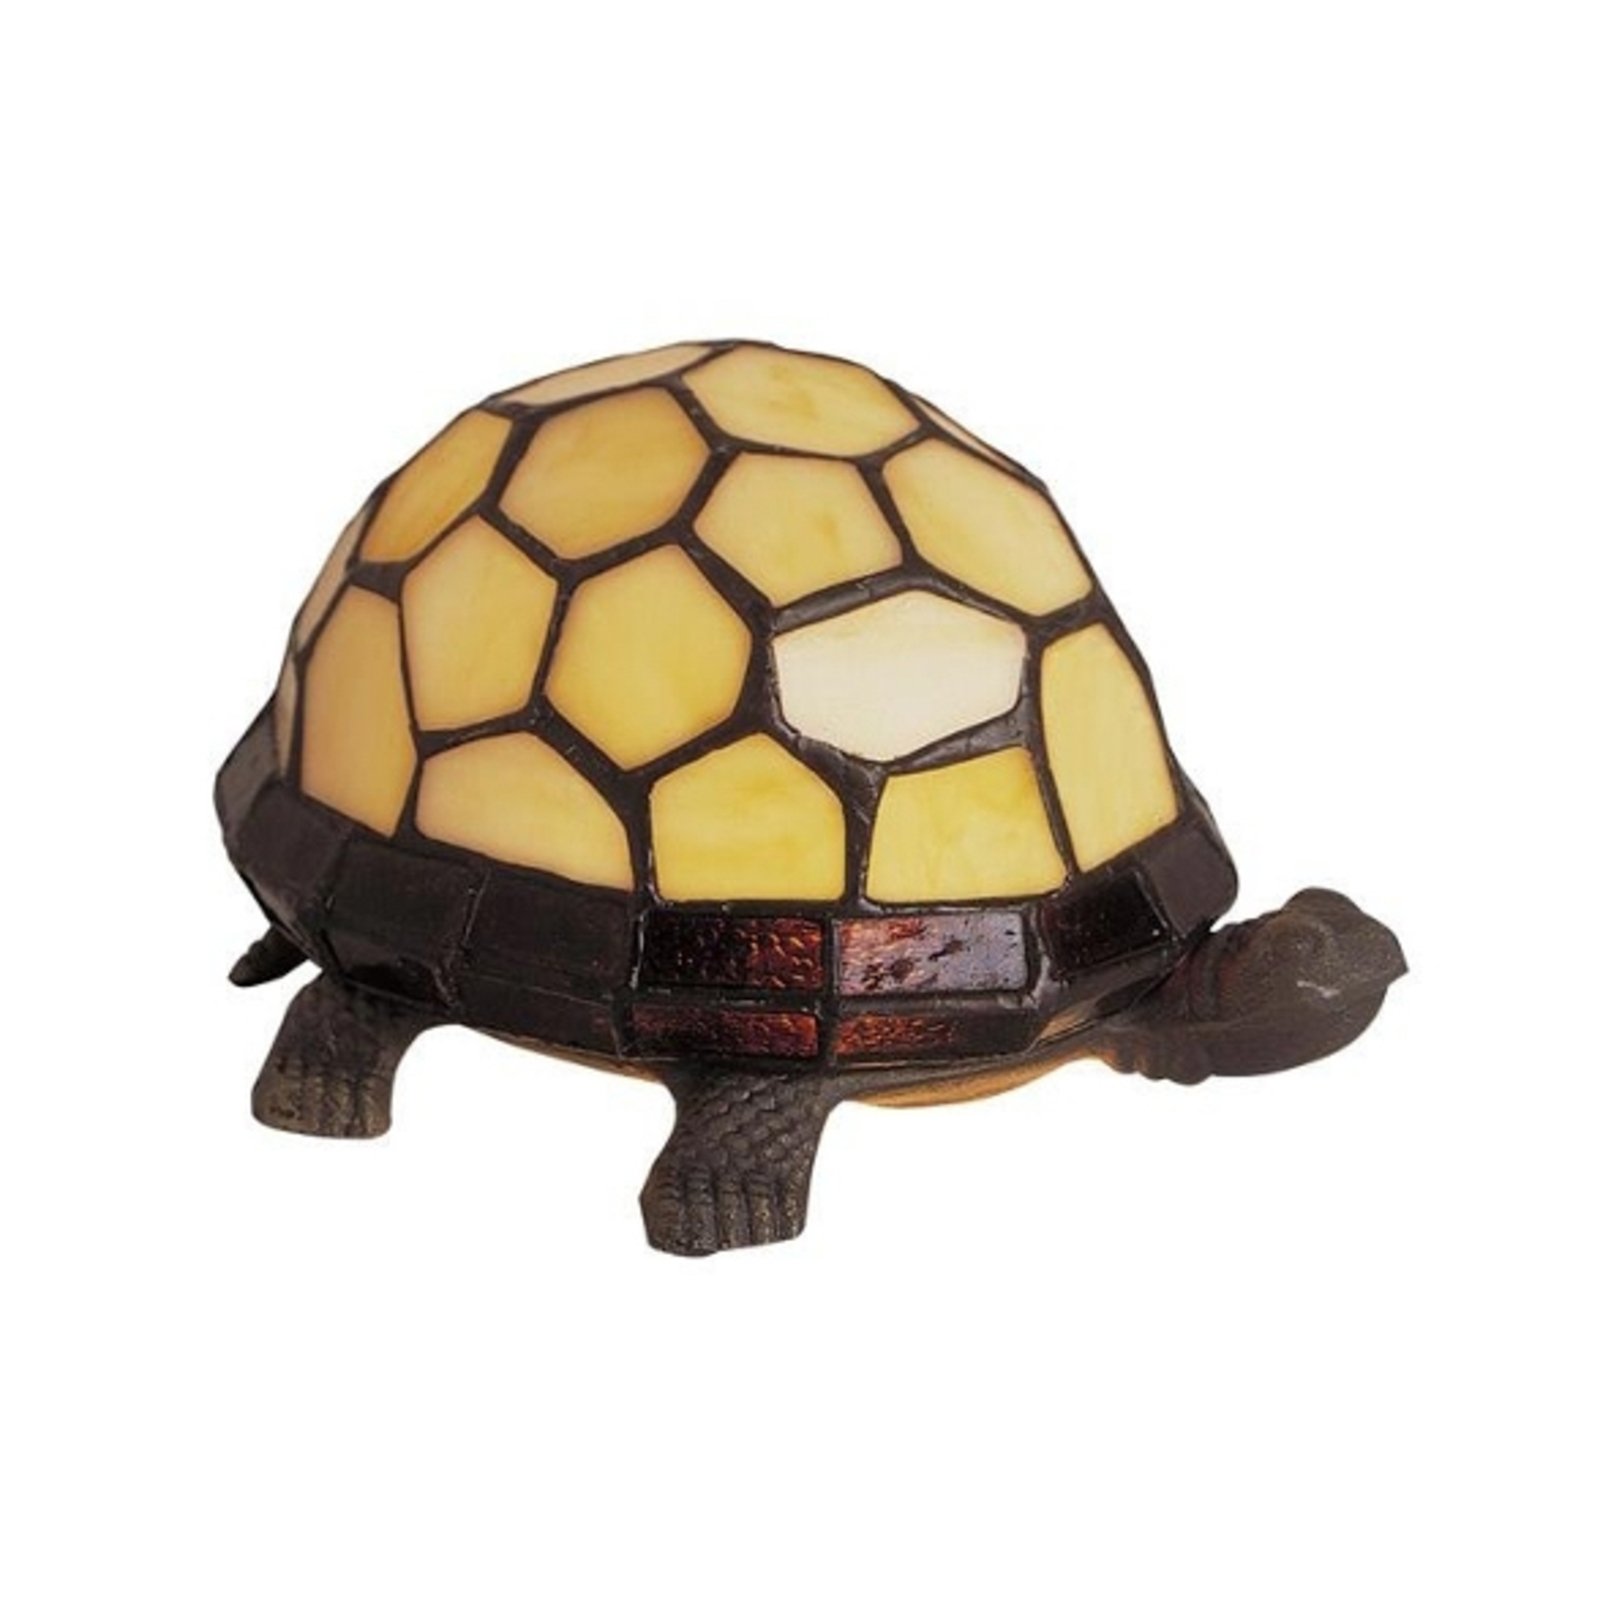 TORTUE table lamp shaped like a turtle